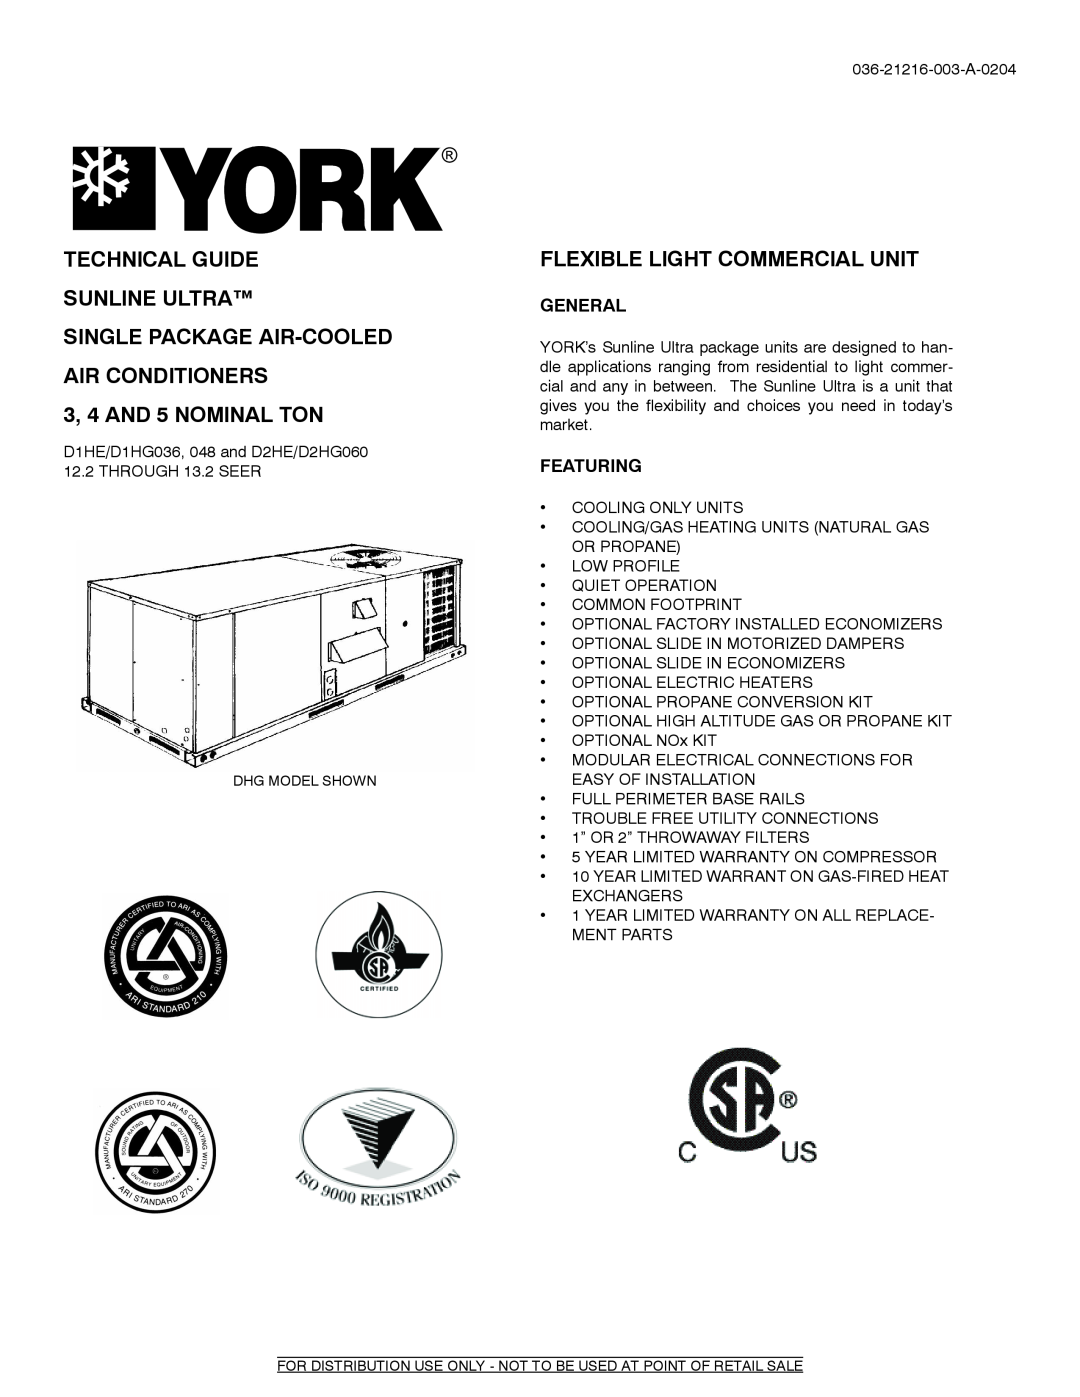 York D1HE/D1HG036 warranty Technical Guide Sunline Ultra, Single Package Air-Cooledair Conditioners, General, Featuring 